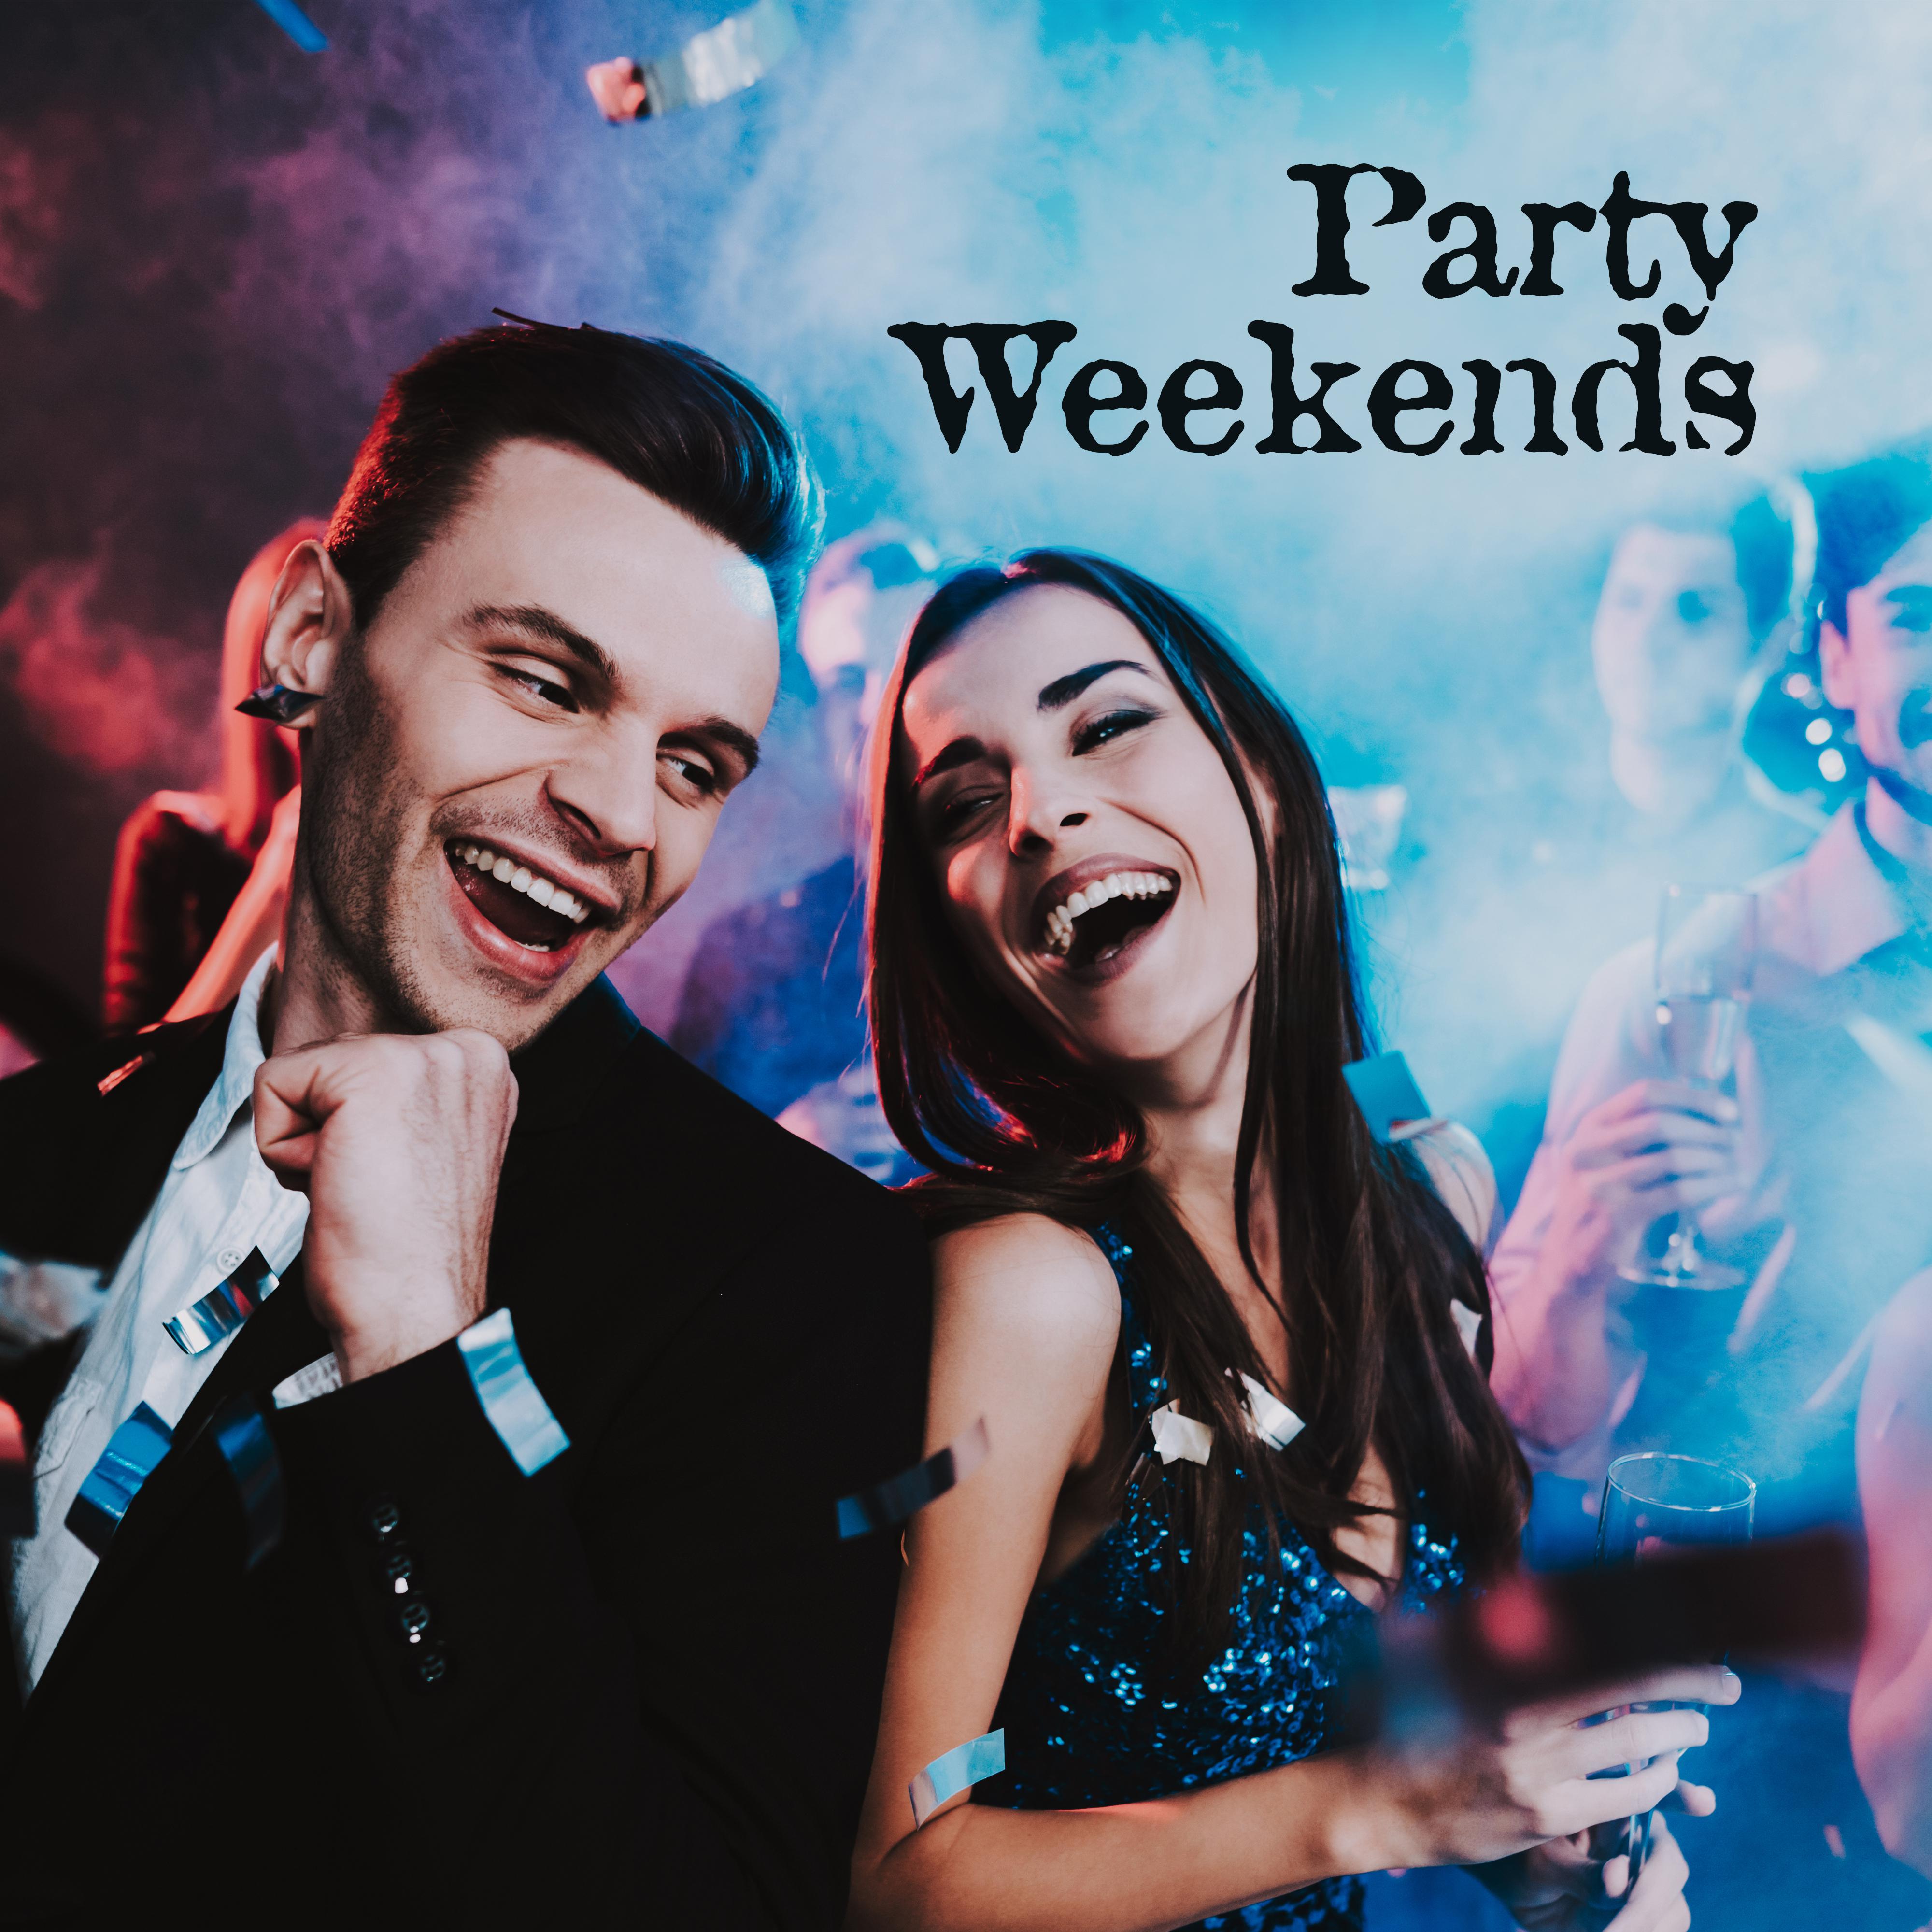 Party Weekends – Chill Out 2019, Party Hits, Chillout Lounge, Club Ecstasy, Dance Music 2019, Crazy Beats